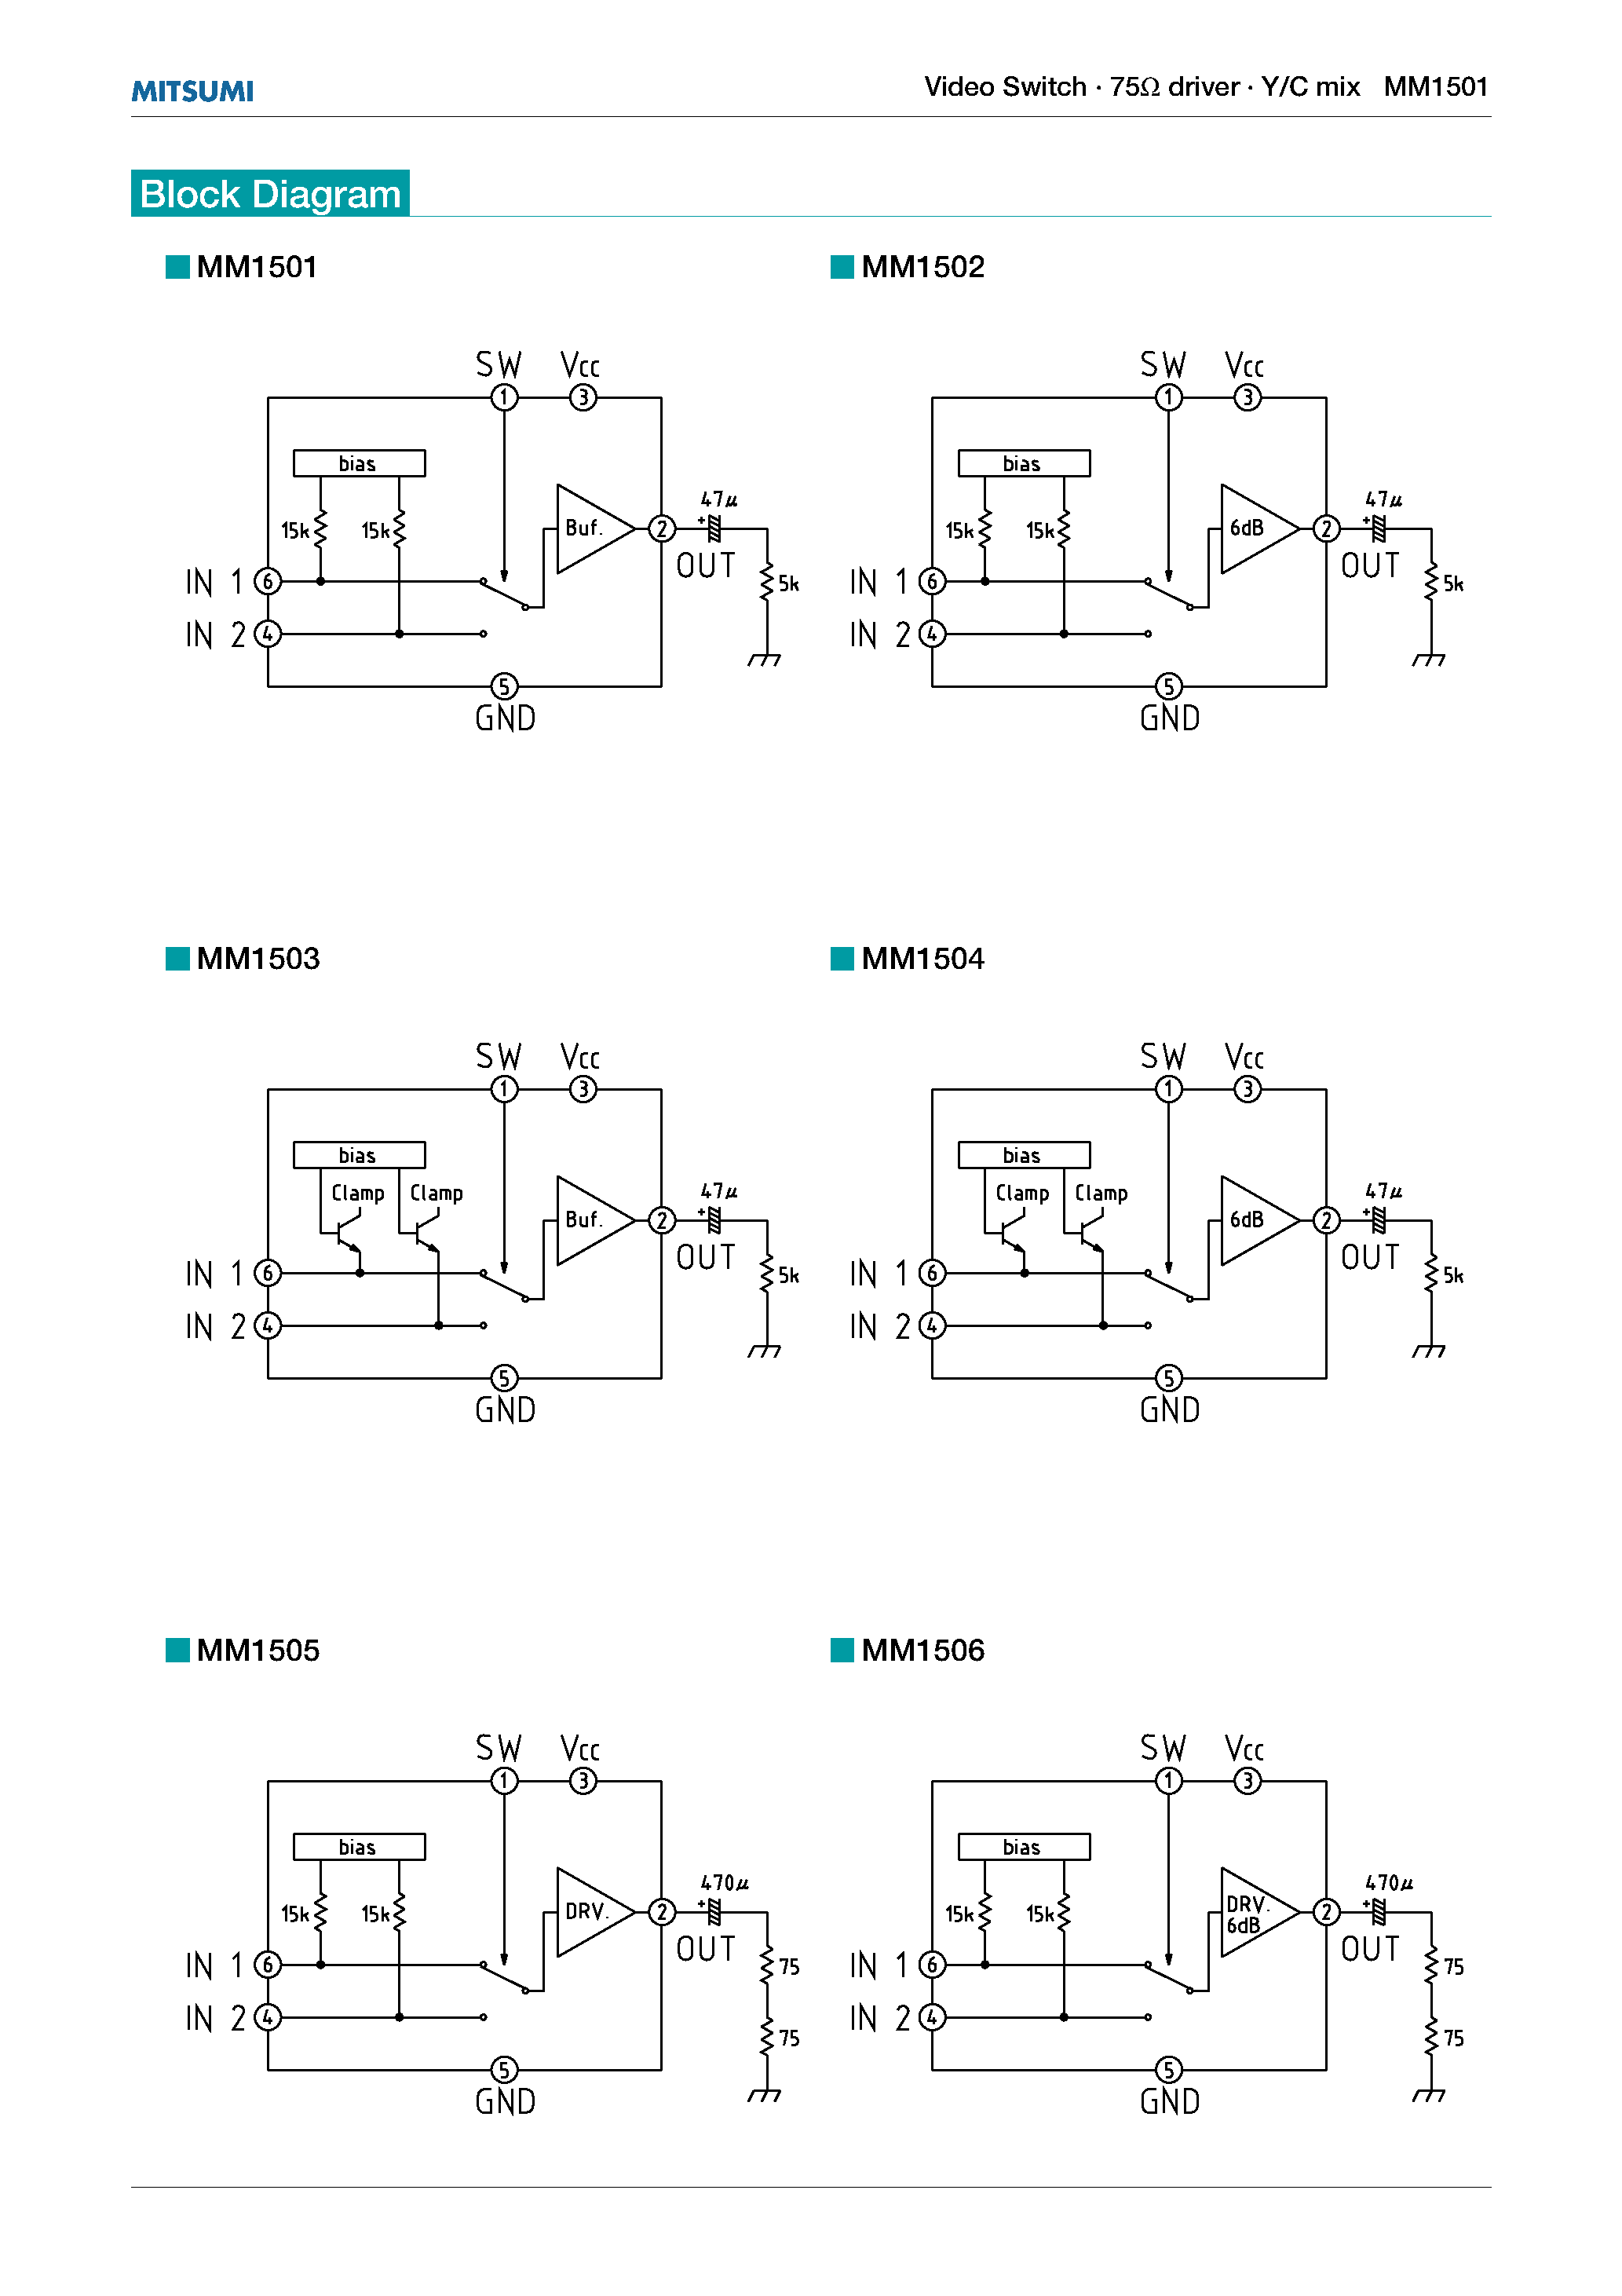 Datasheet MM1510 - Video Switch 75 driver Y/C mix page 2